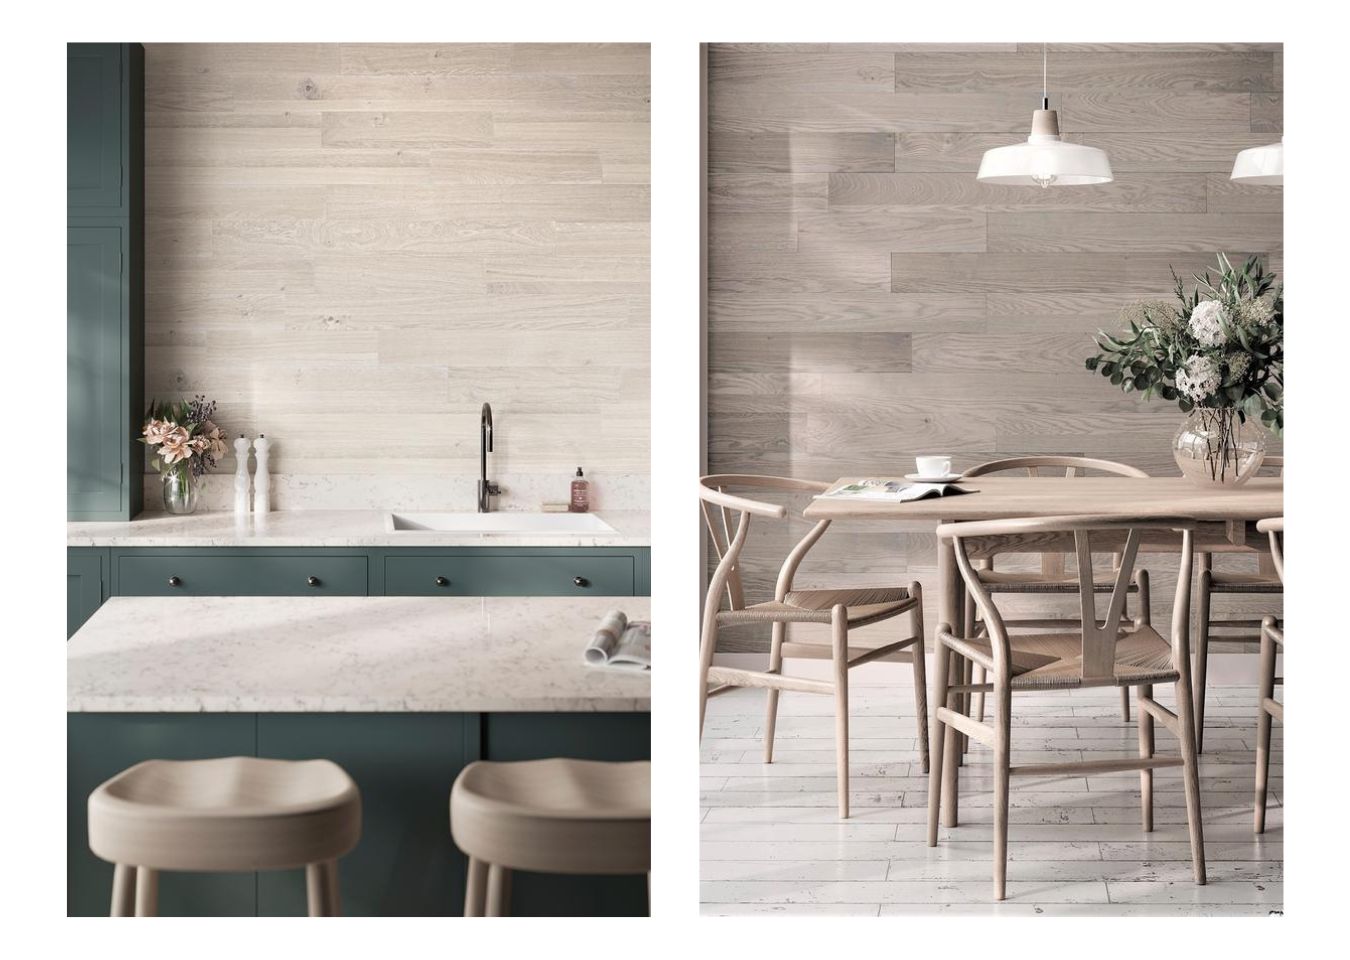 Two images, on the left shows Alaska Peel and Stick Plank in a kitchen behind a sink, paired with teal kitchen cabinets. On the right shows a dining room with Sky Grey Peel and Stick Plants across the back wall, paired with a pale wood dining table and chairs